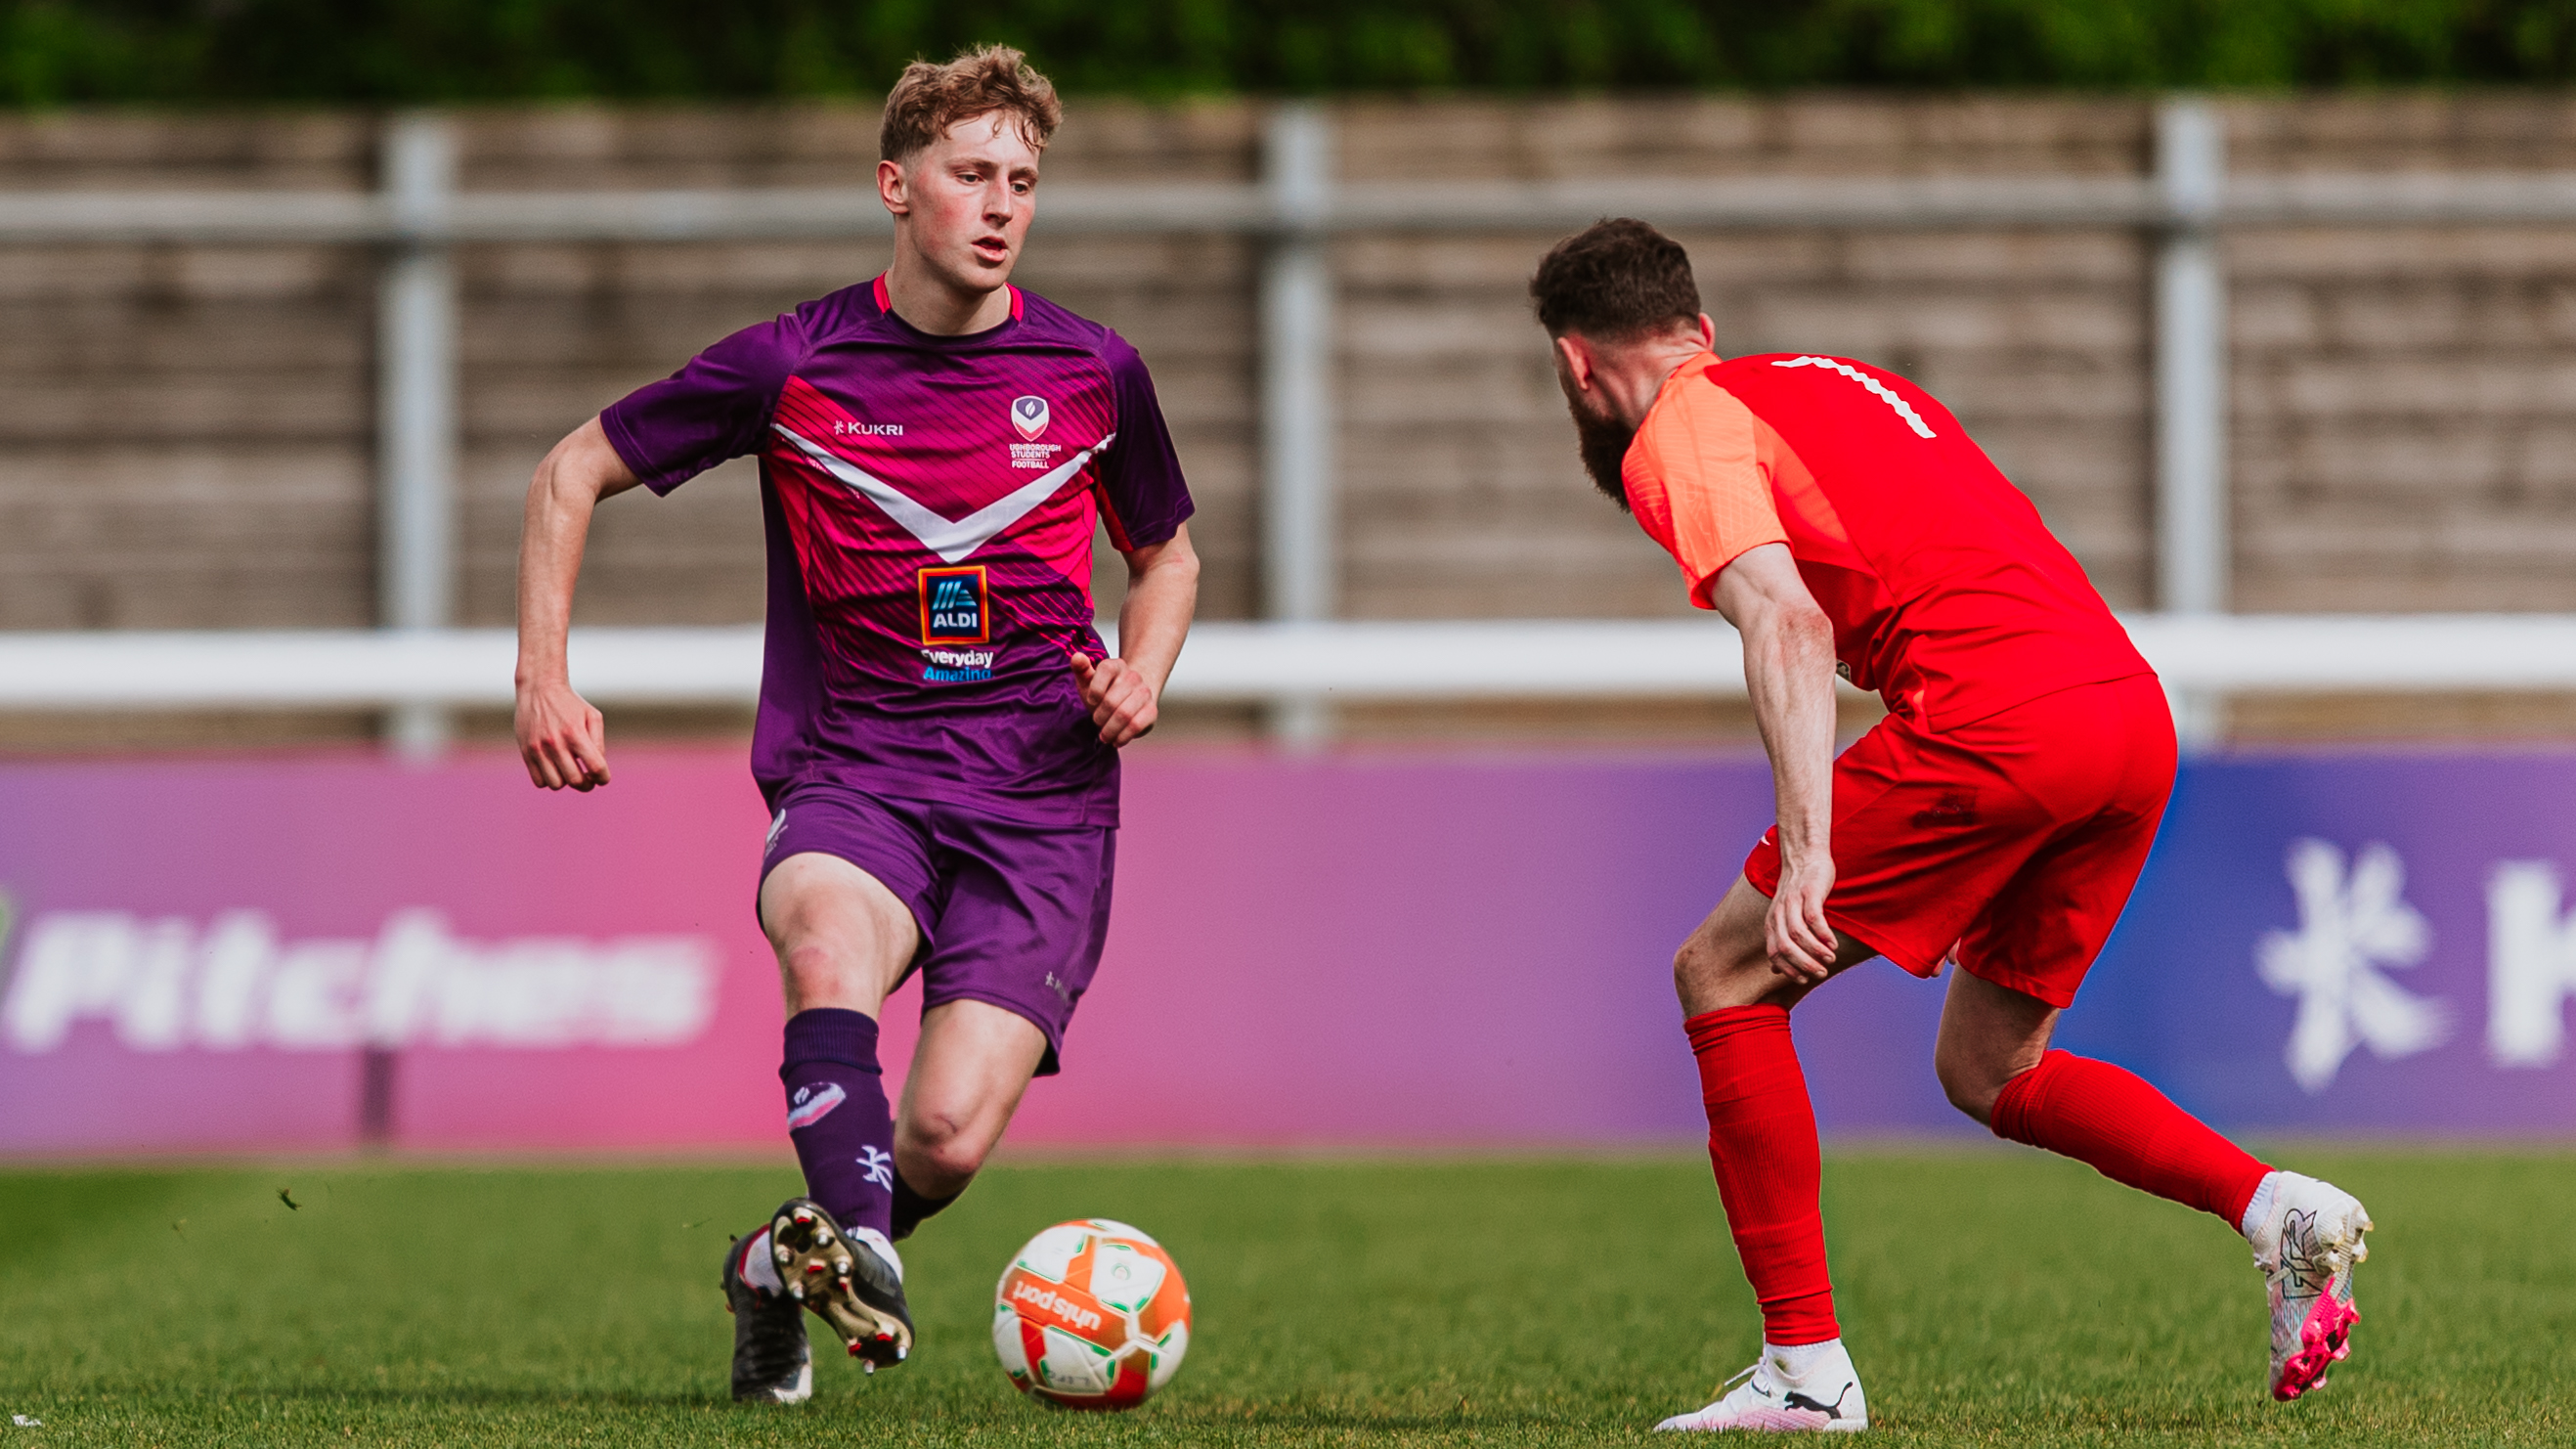 Loughborough Students player Joe Fountain in action playing football